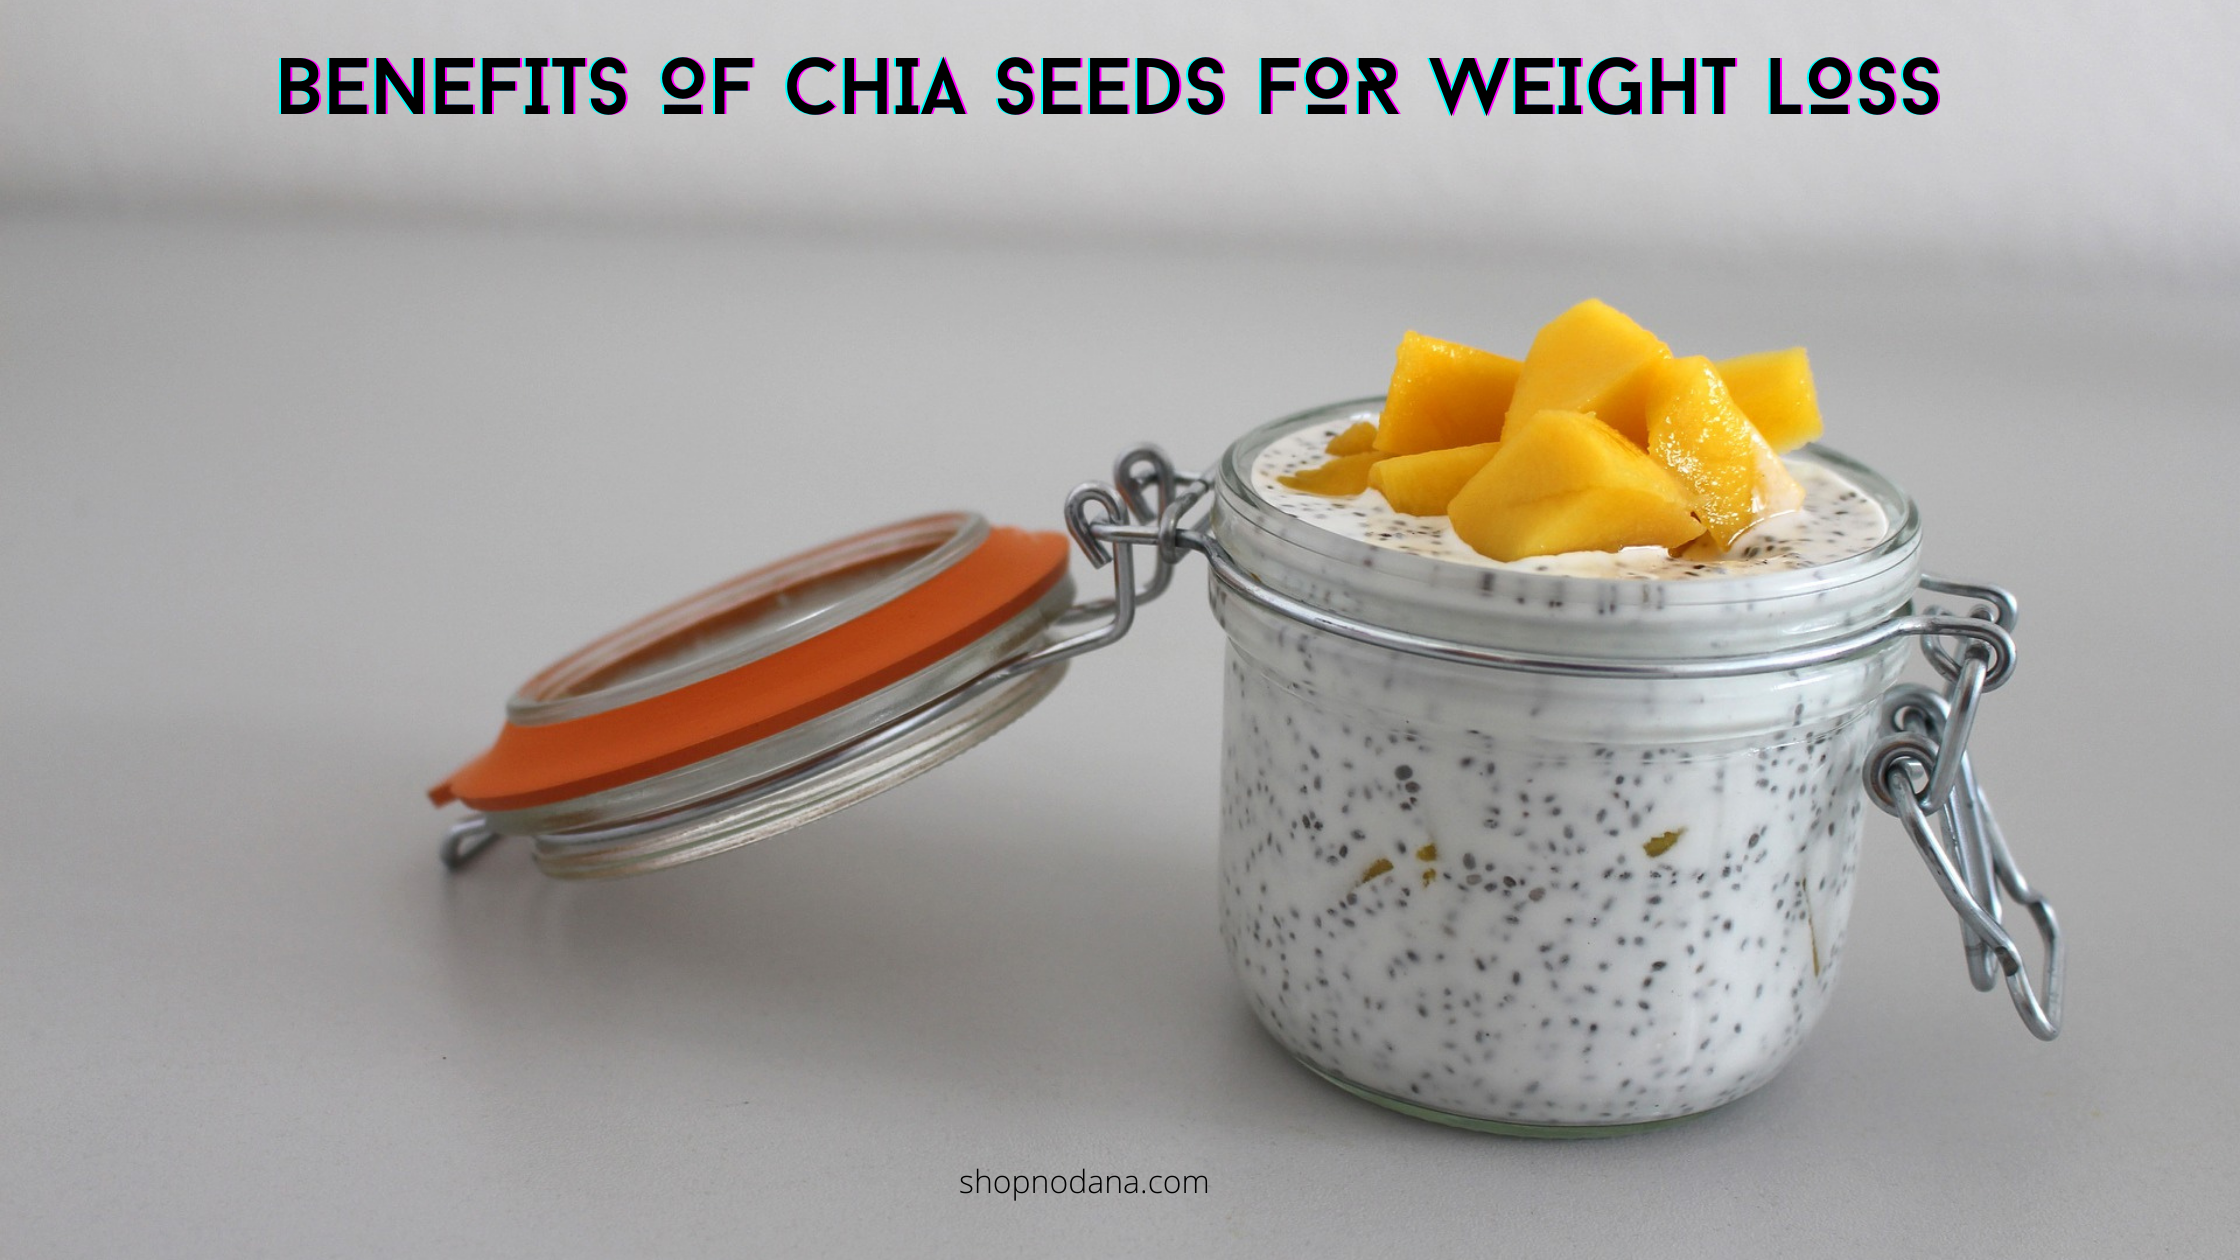 Benefits of chia seeds for weight loss